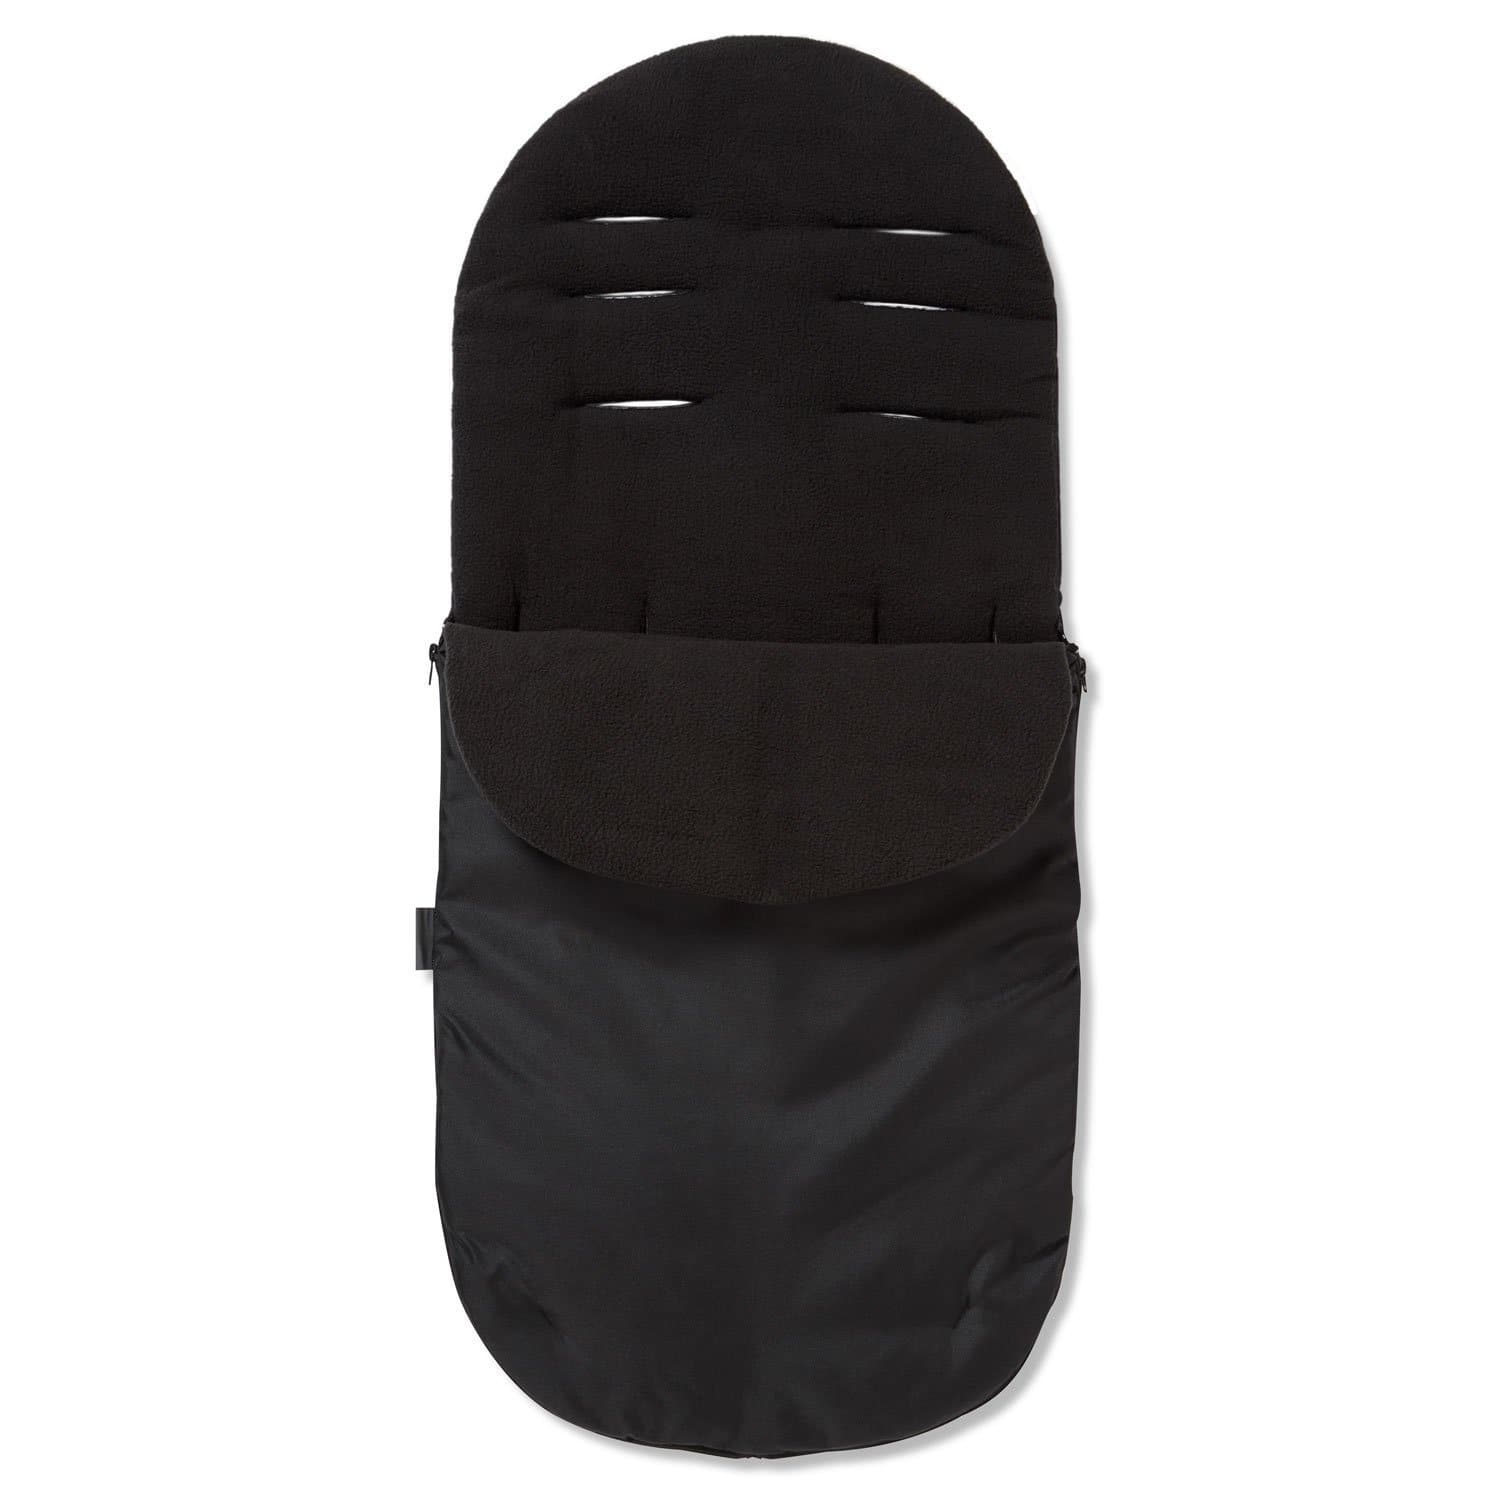 Footmuff / Cosy Toes Compatible with Zooper - Black / Fits All Models | For Your Little One